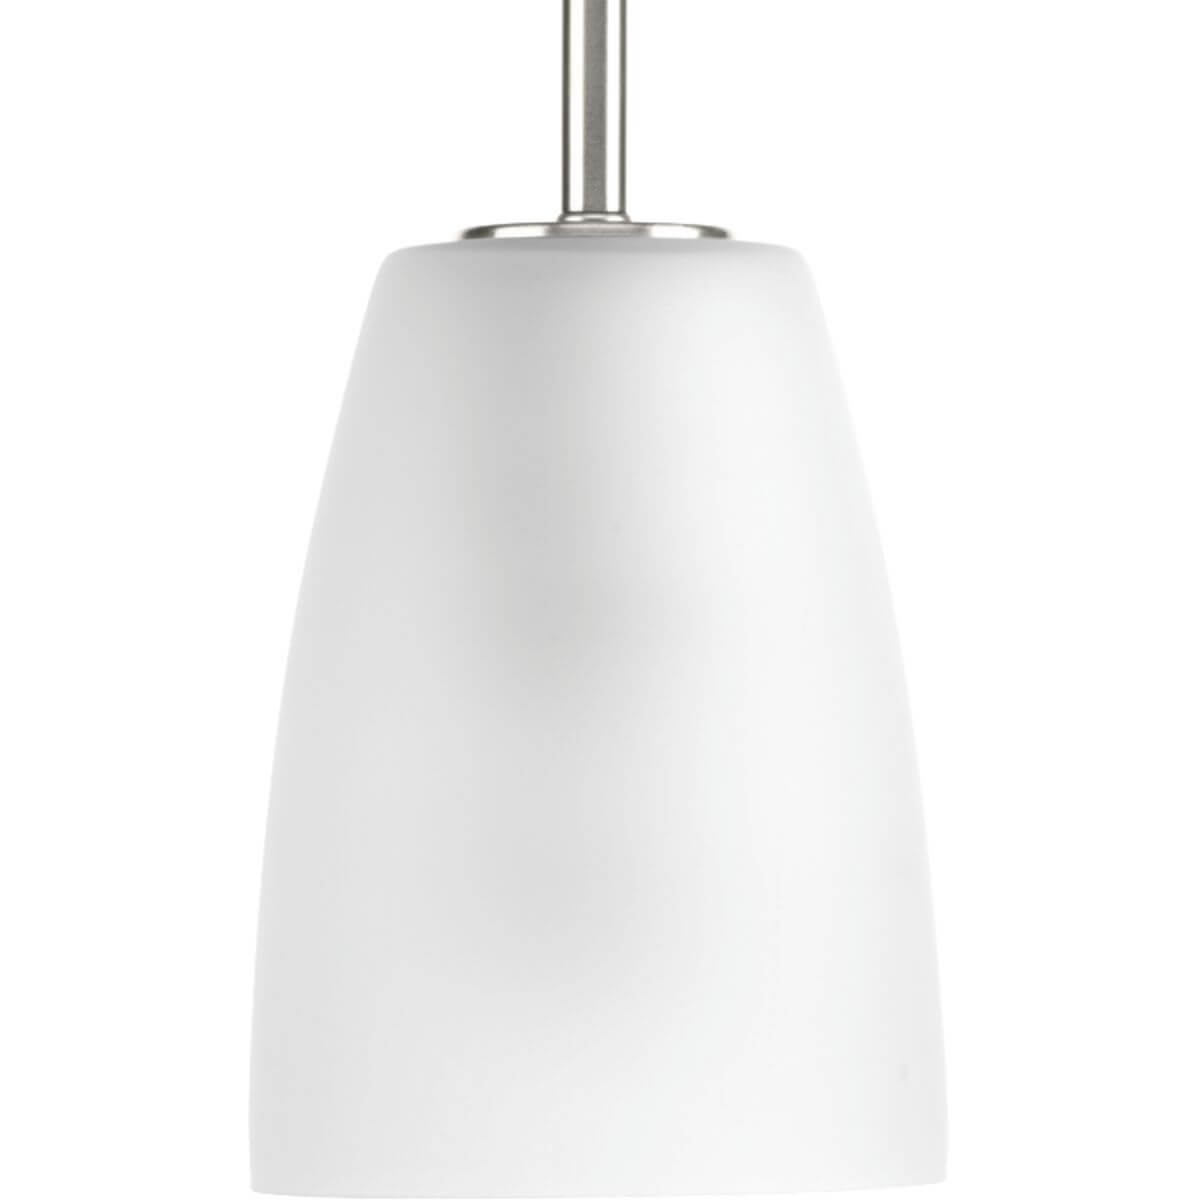 Progress Lighting Leap 1 Light 5 inch Pendant in Brushed Nickel with Etched Glass P500029-009